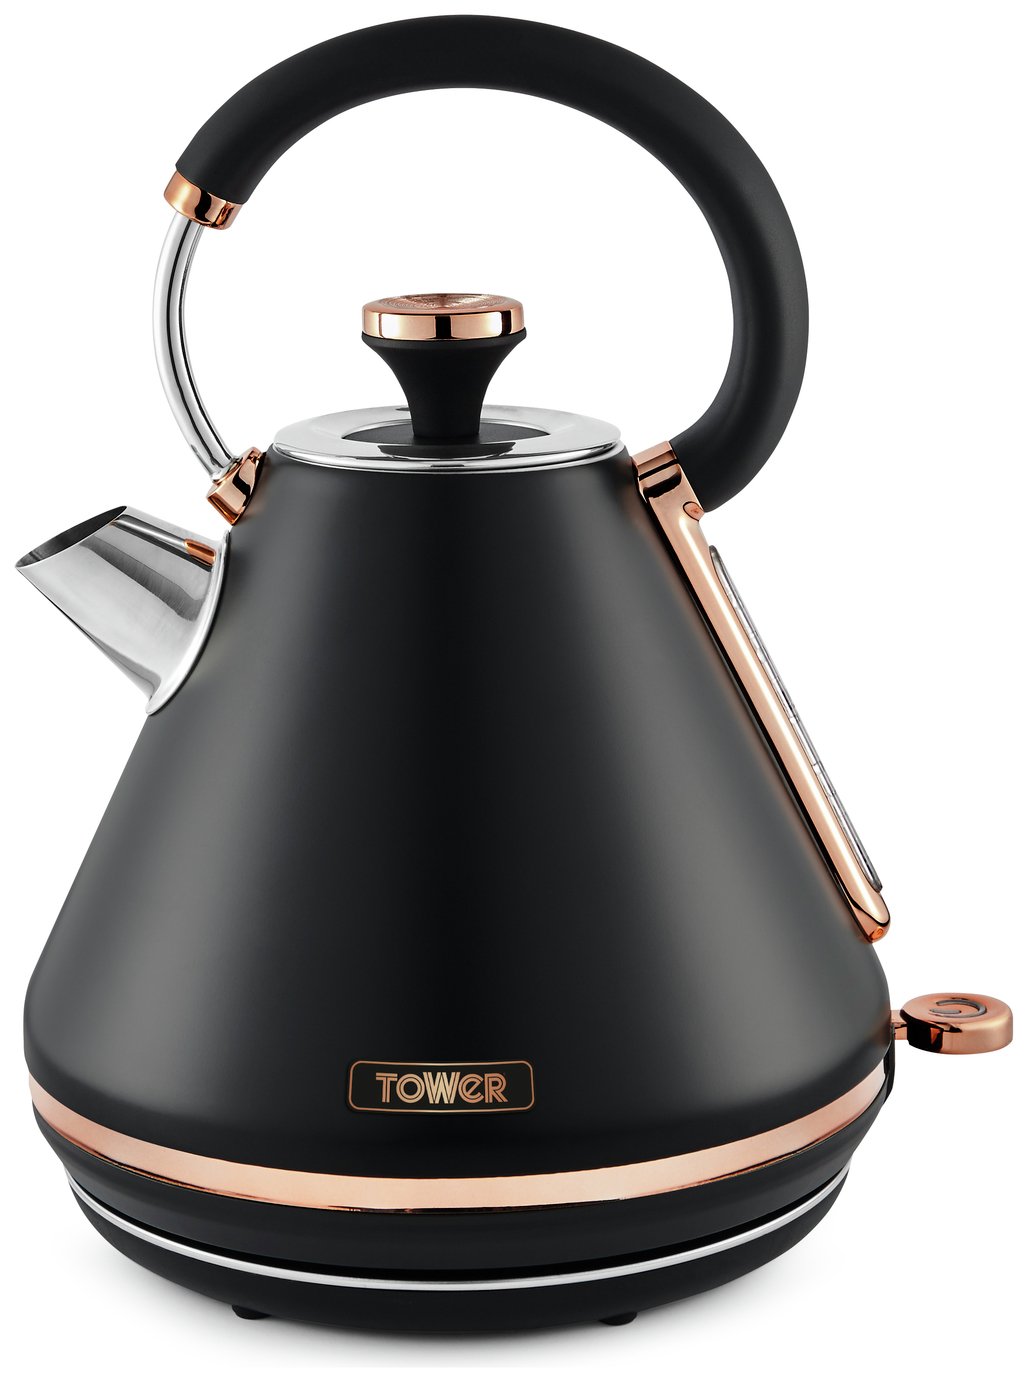 Tower T10044RG Cavaletto Kettle - Black